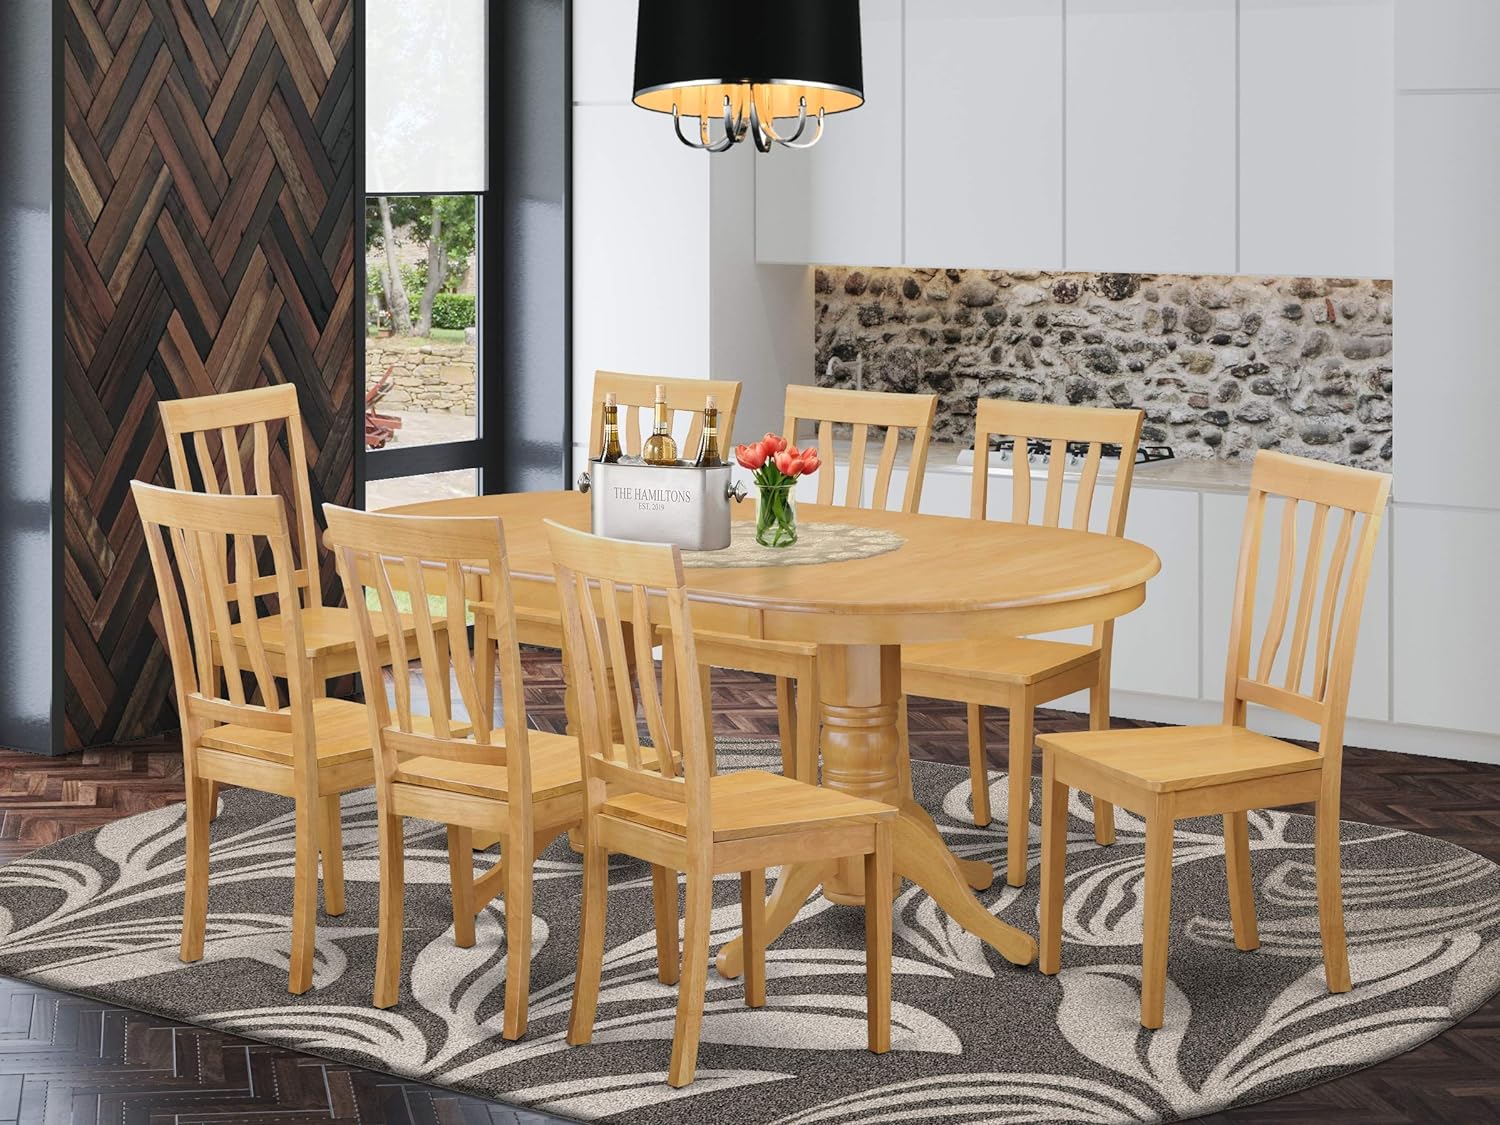 9 Pc Wood Oval Dining Room Table With Leaf and Chairs Set In Oak